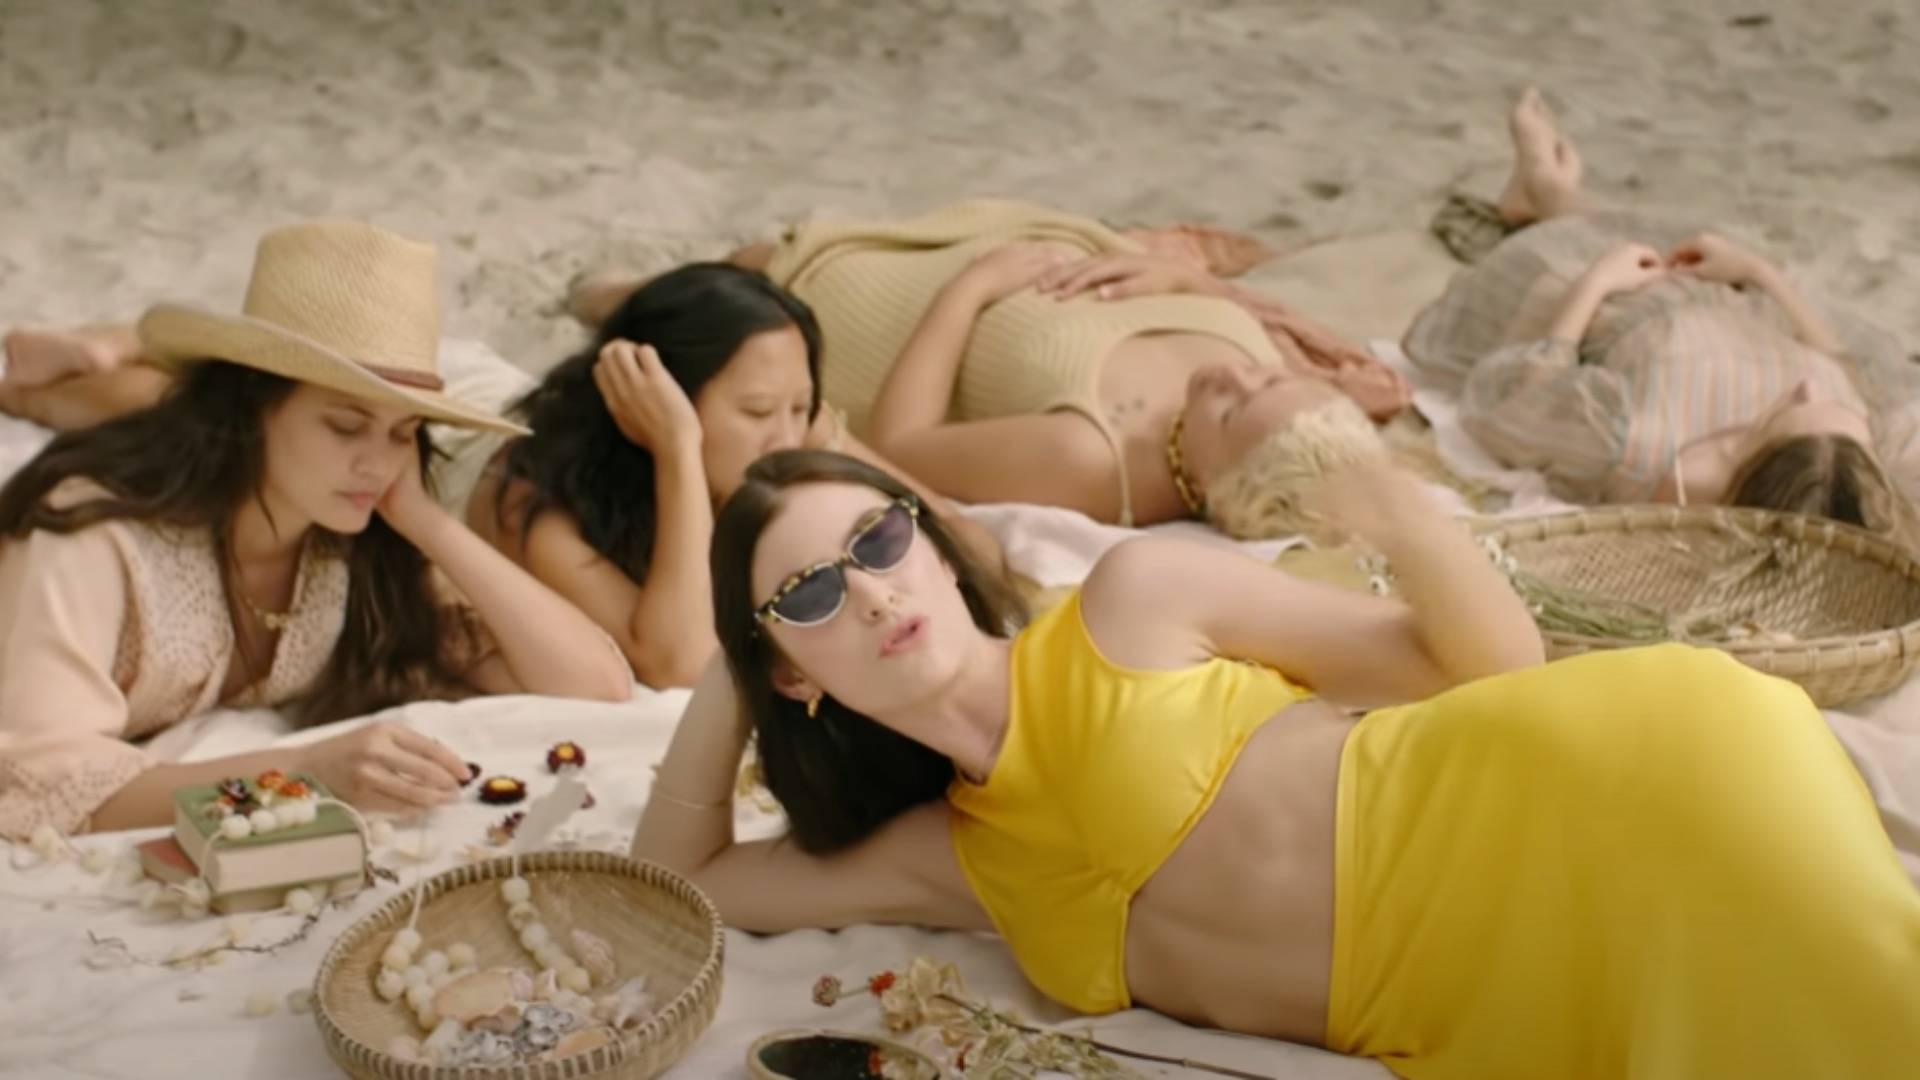 Lorde lying on beach singing wearing sunglasses and long yellow skirt and yellow crop top with friends in the background, a still from her new 'Solar Power' video